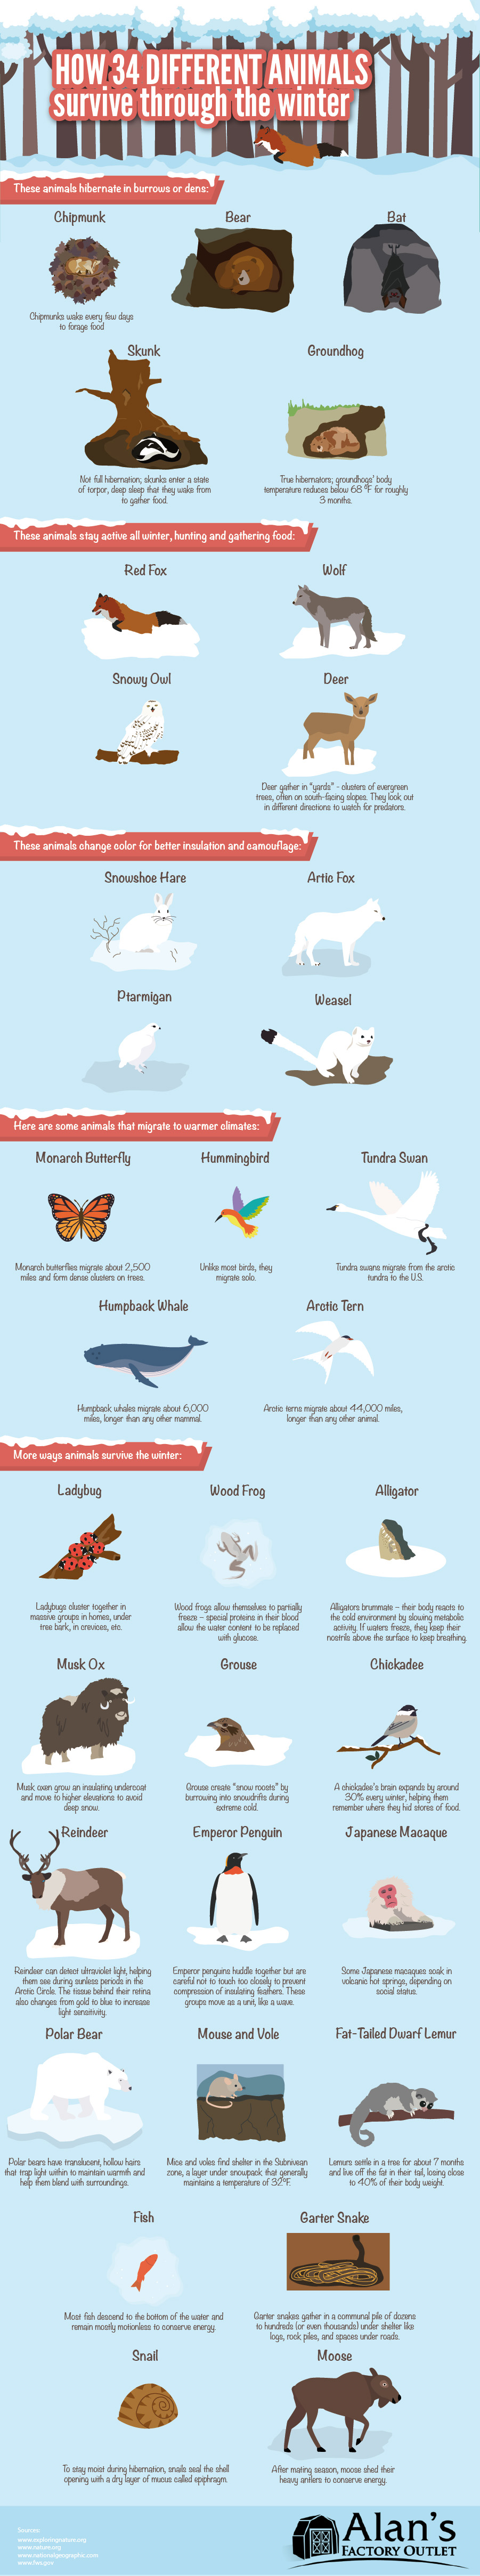 How 34 Different Animals Survive Through the Winter